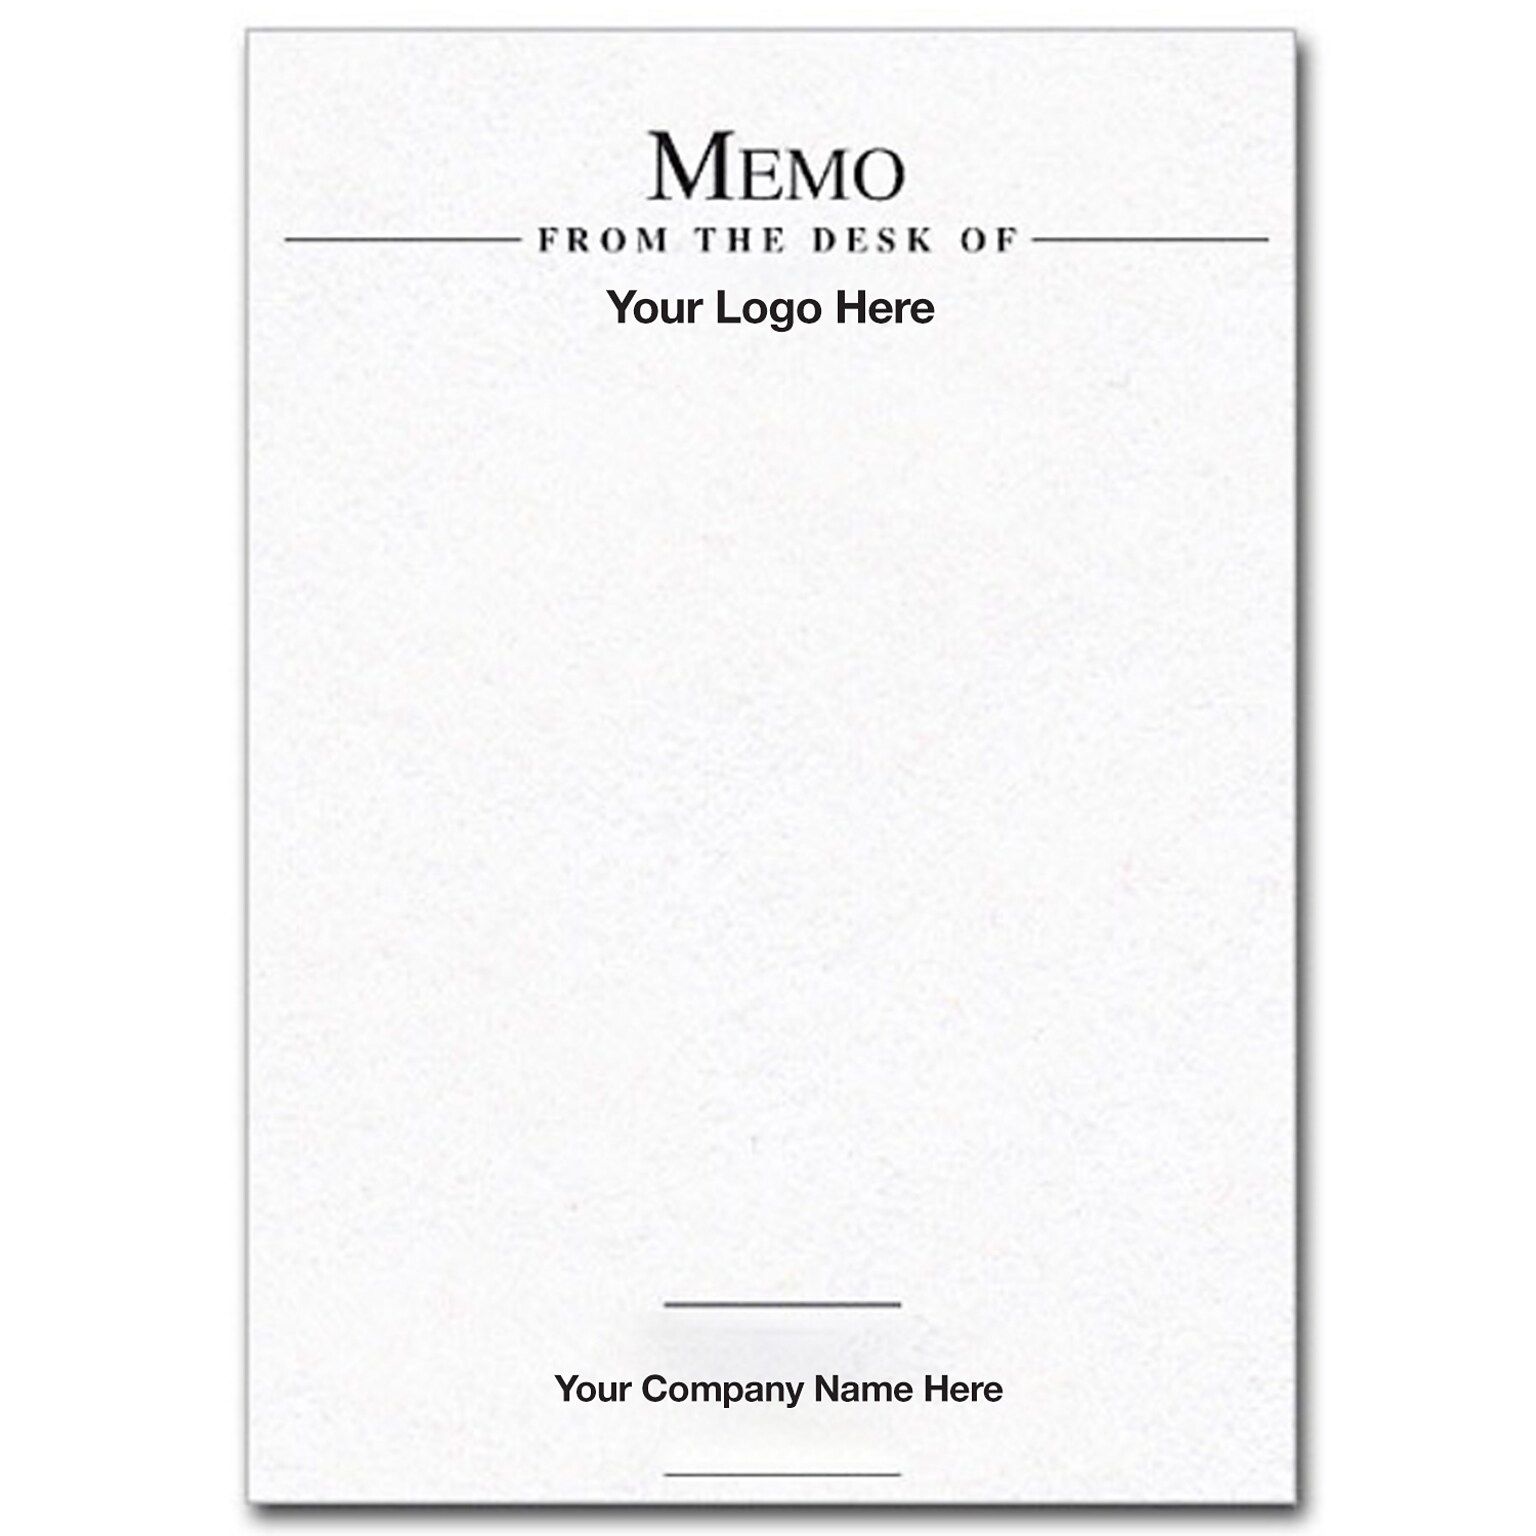 Custom Memo Pads, White Smooth 24# Text Stock, 4 x 5.5, 1 Standard and 1 Custom Inks, Flat Ink, 100 Sheets per Pad